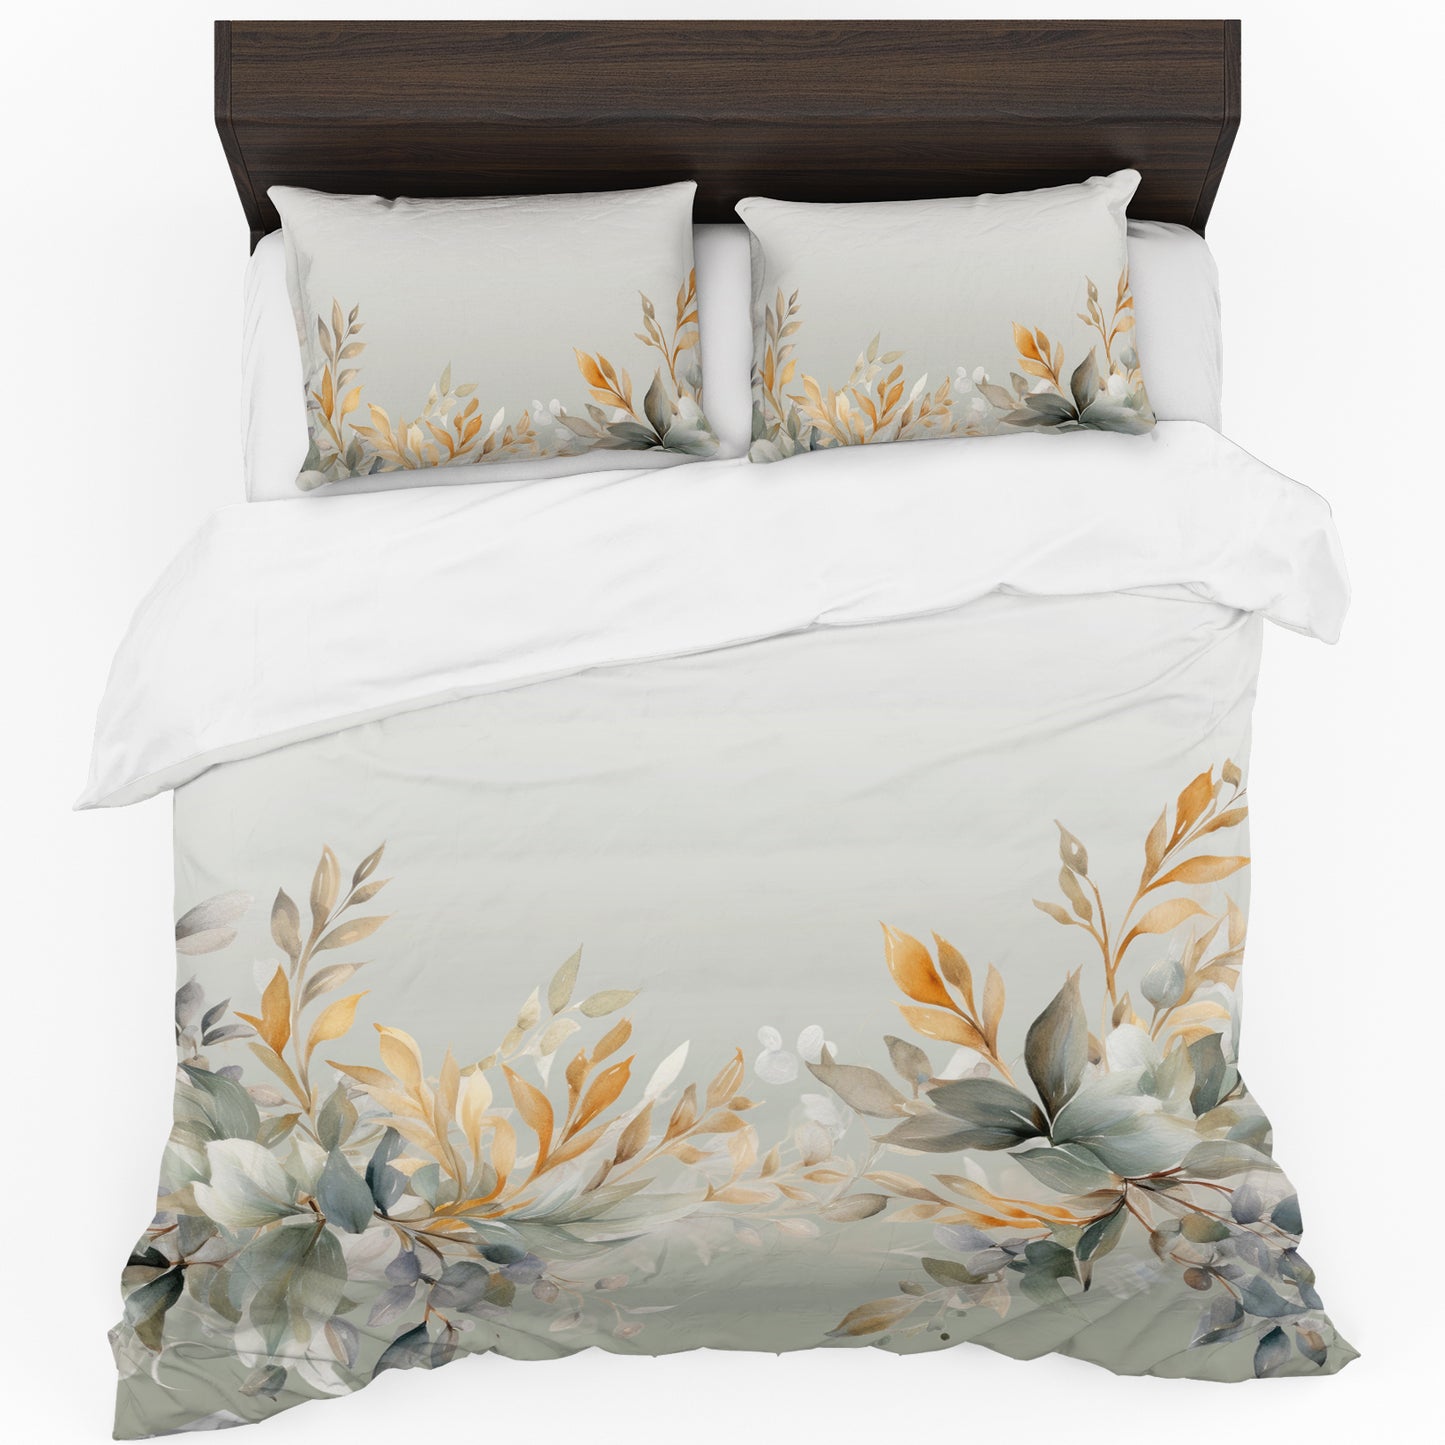 Blowing in the Wind Duvet Cover Set